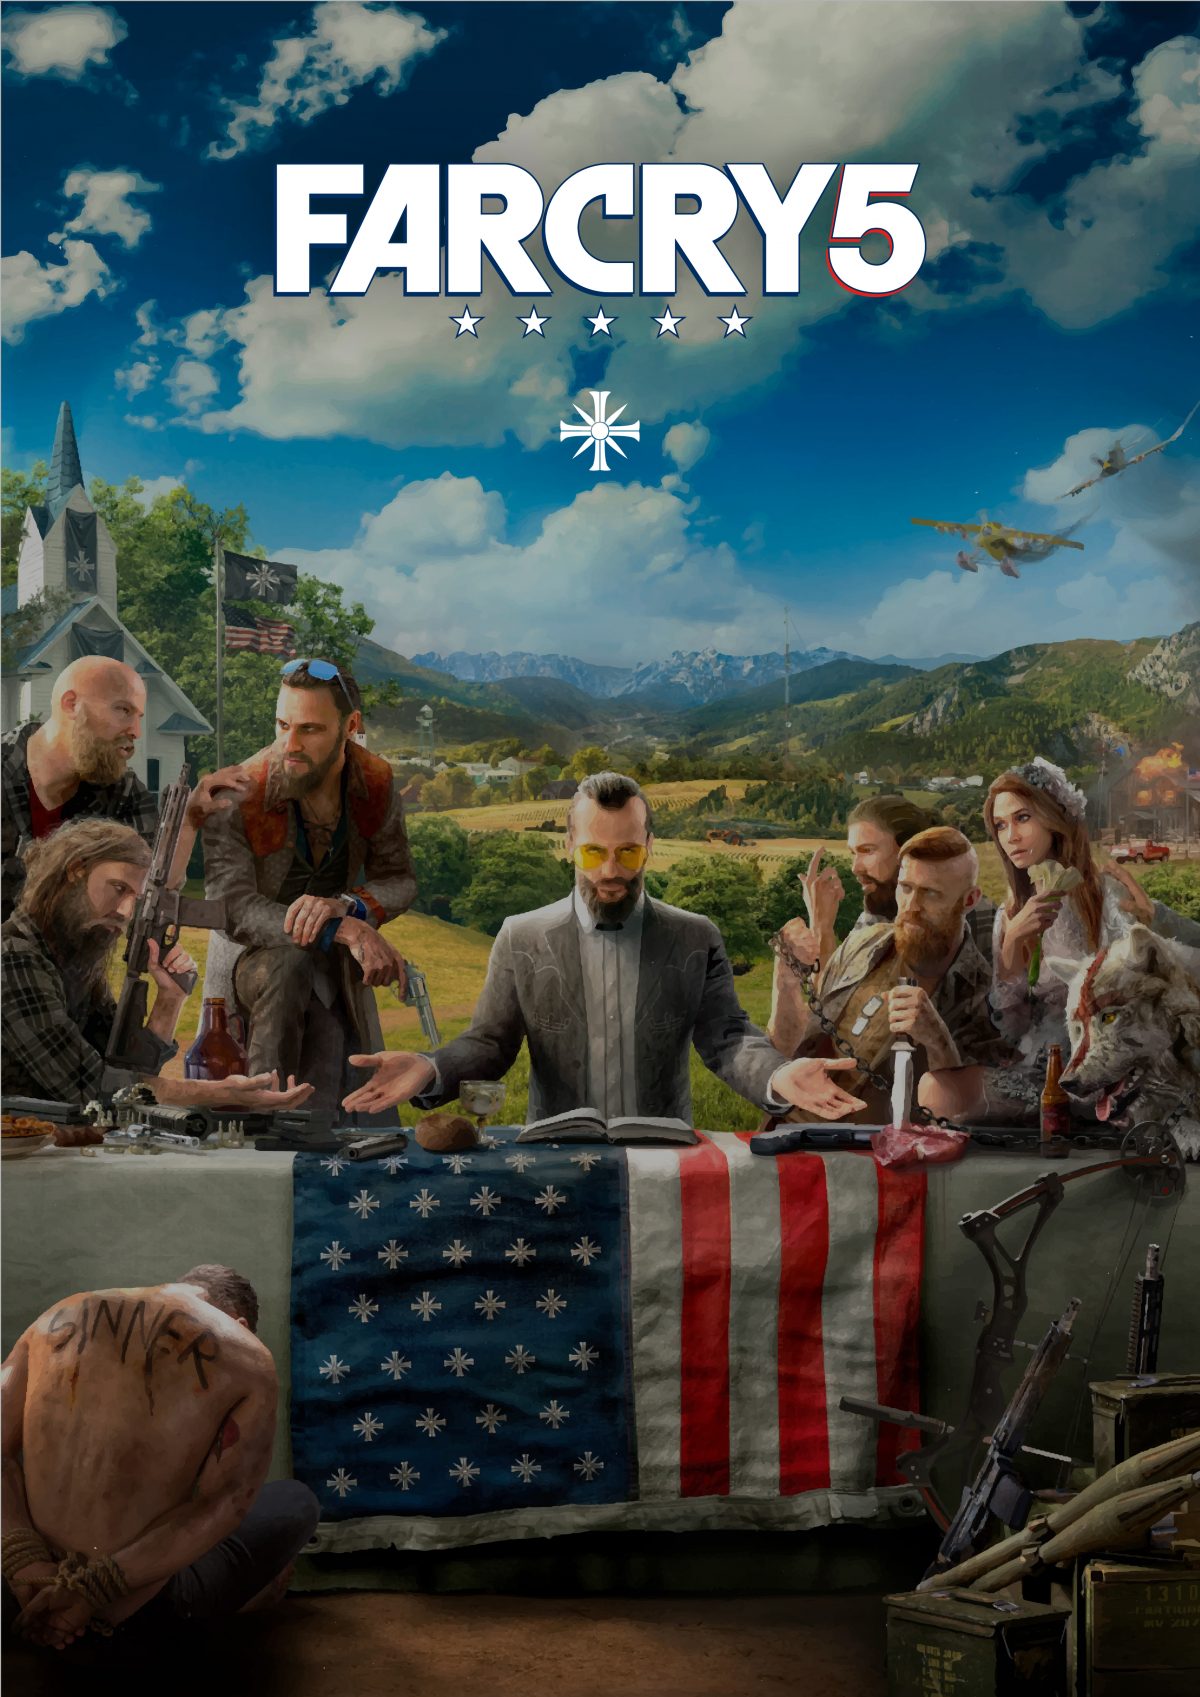 FARCRY 5 Poster - PosterSpy